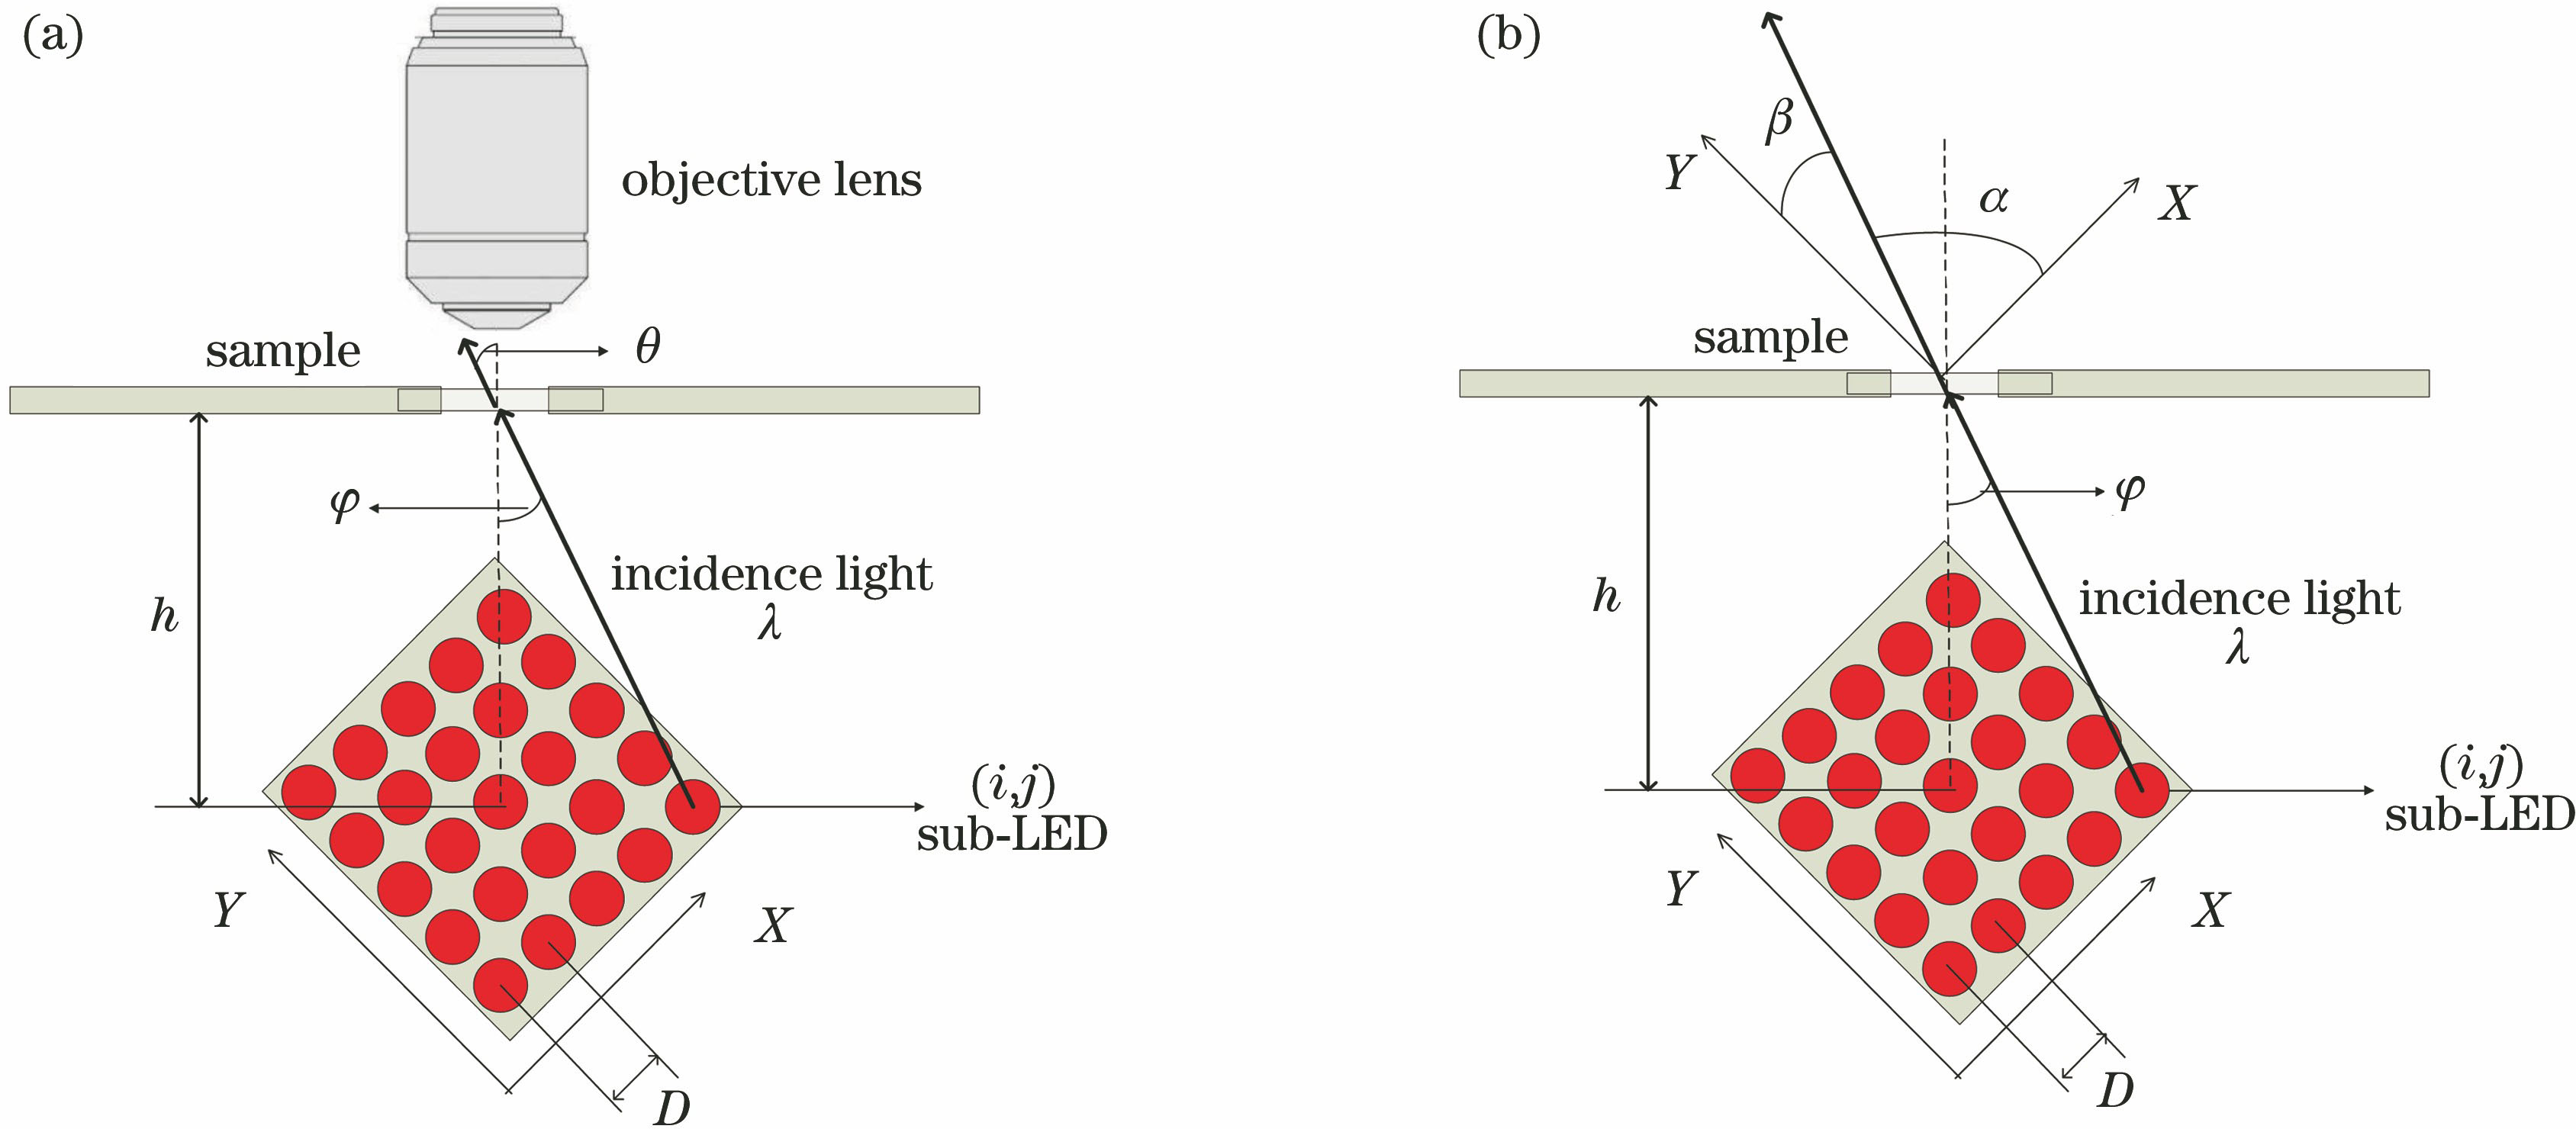 Spatial position relationship in the setup. (a) Spatial position relationship and basic light path of the setup; (b) specific light path with edge rays